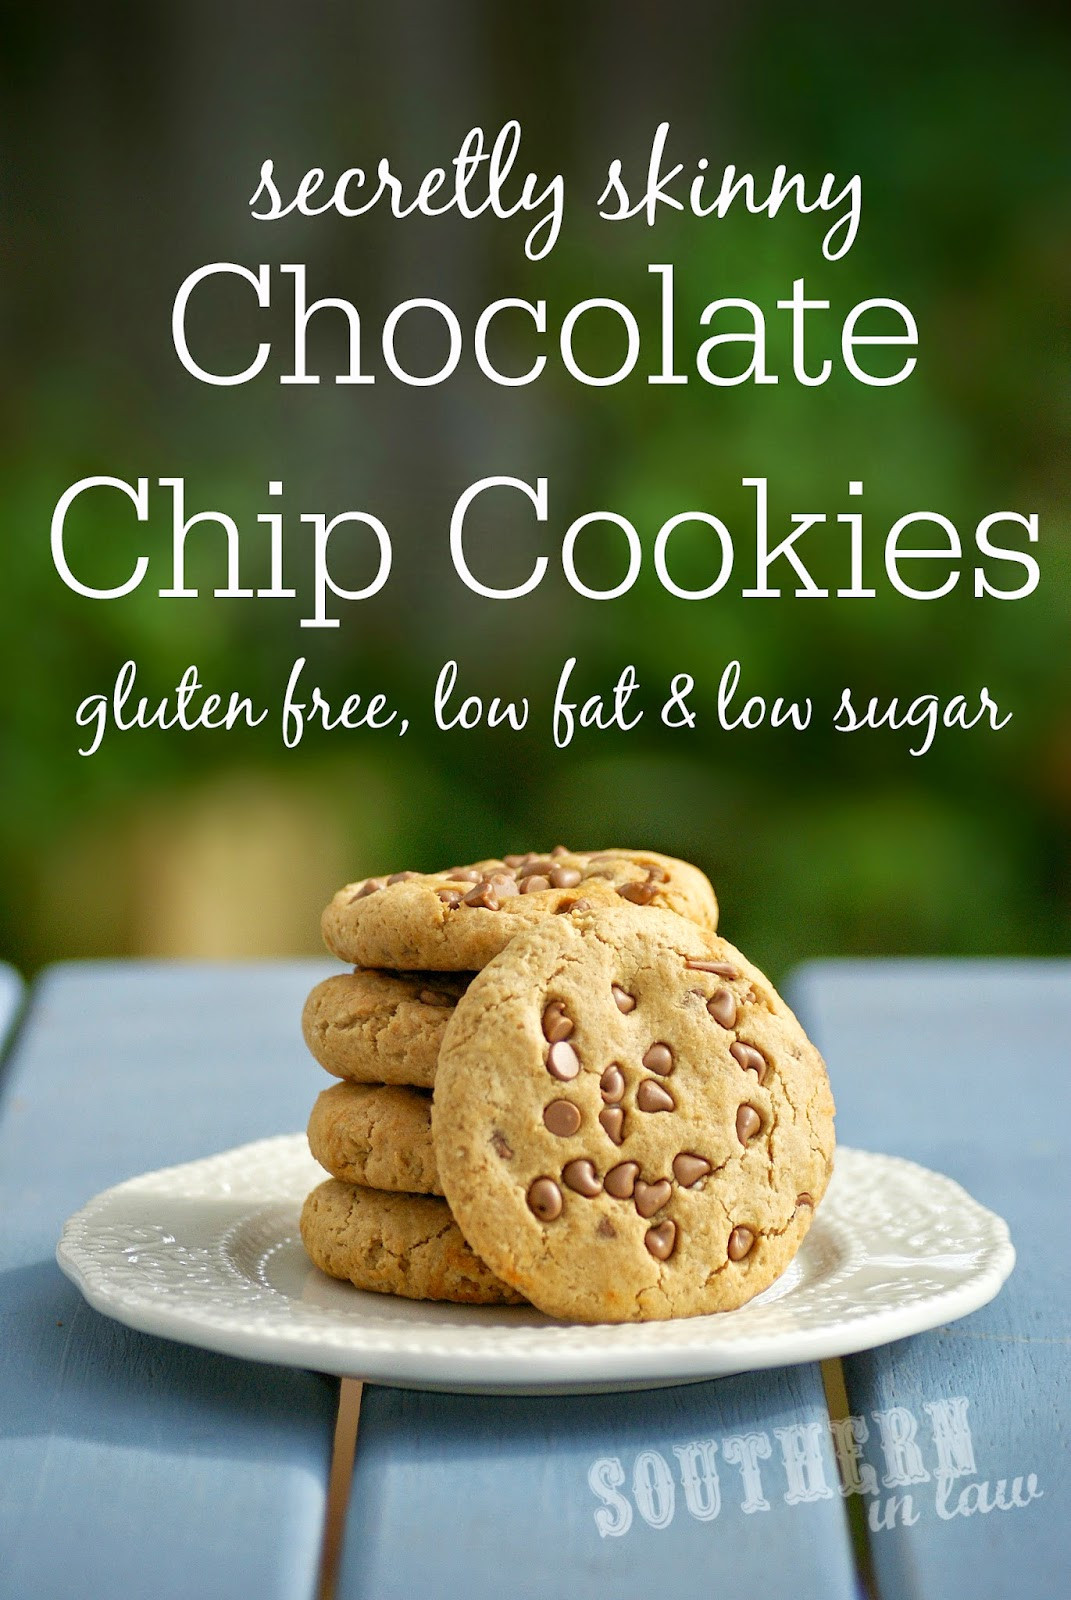 Low Fat Chocolate Chip Cookies Recipes
 Southern In Law Recipe Secretly Skinny Chocolate Chip